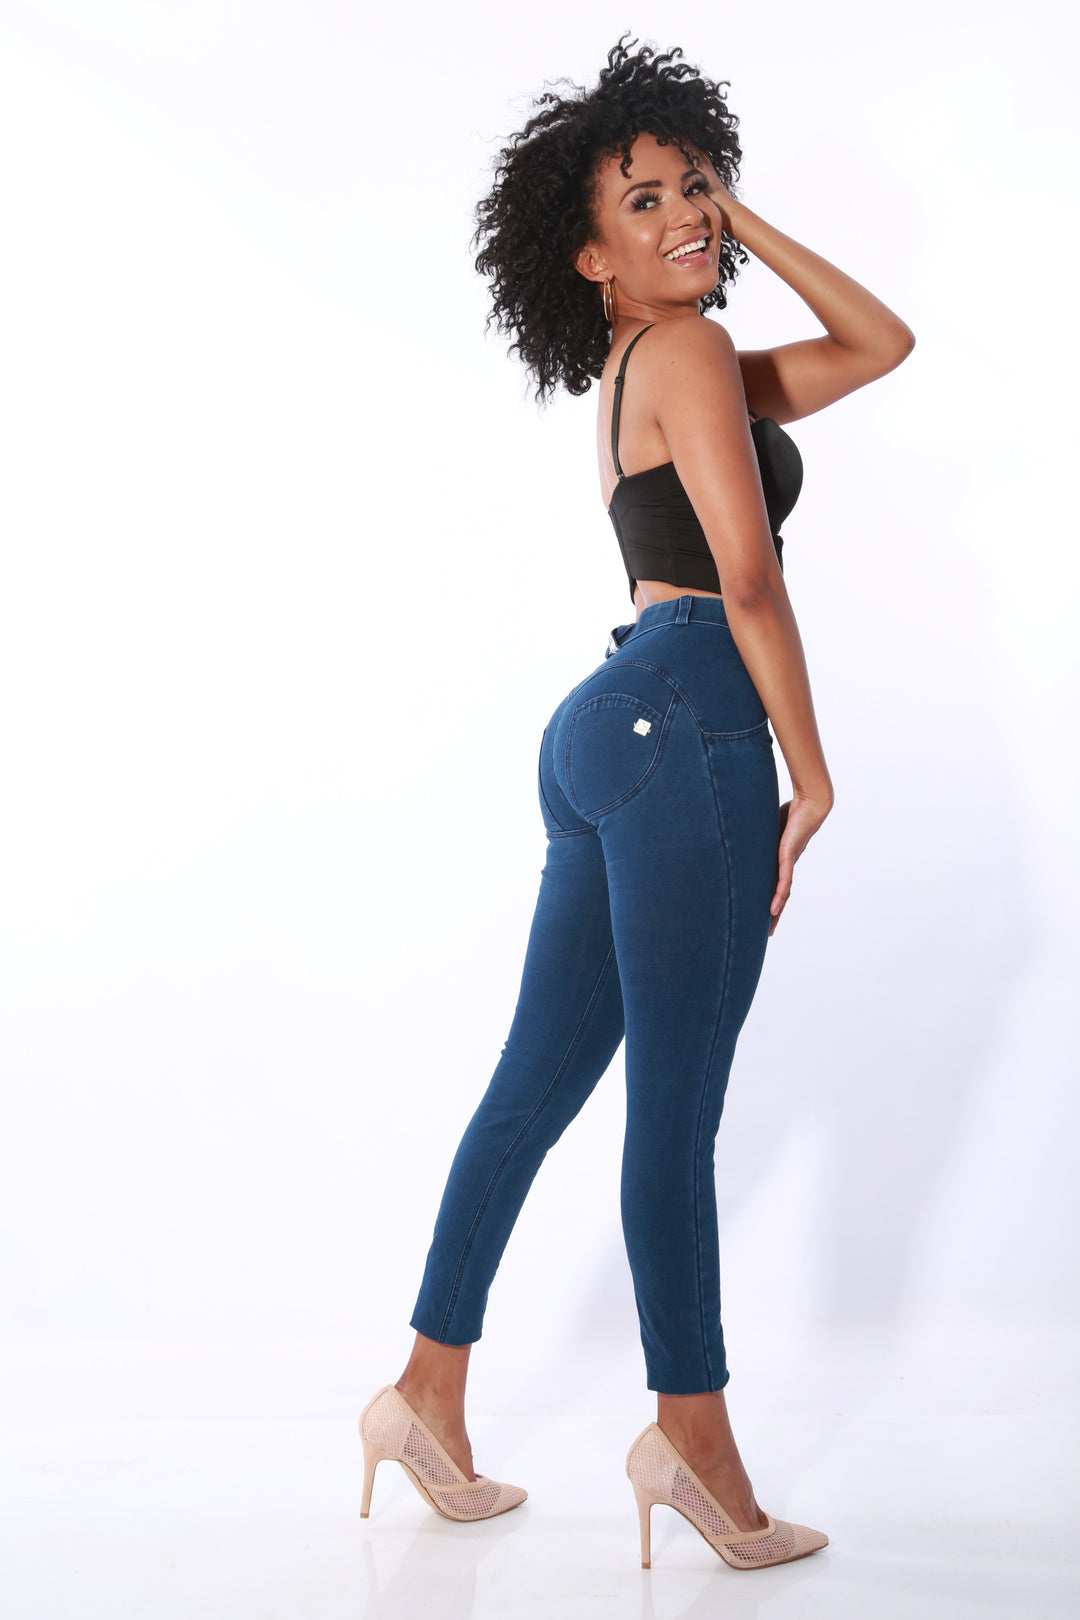 Mid waist Jeans/Jeggings pants Butt lifting Shaping - Dark Blue